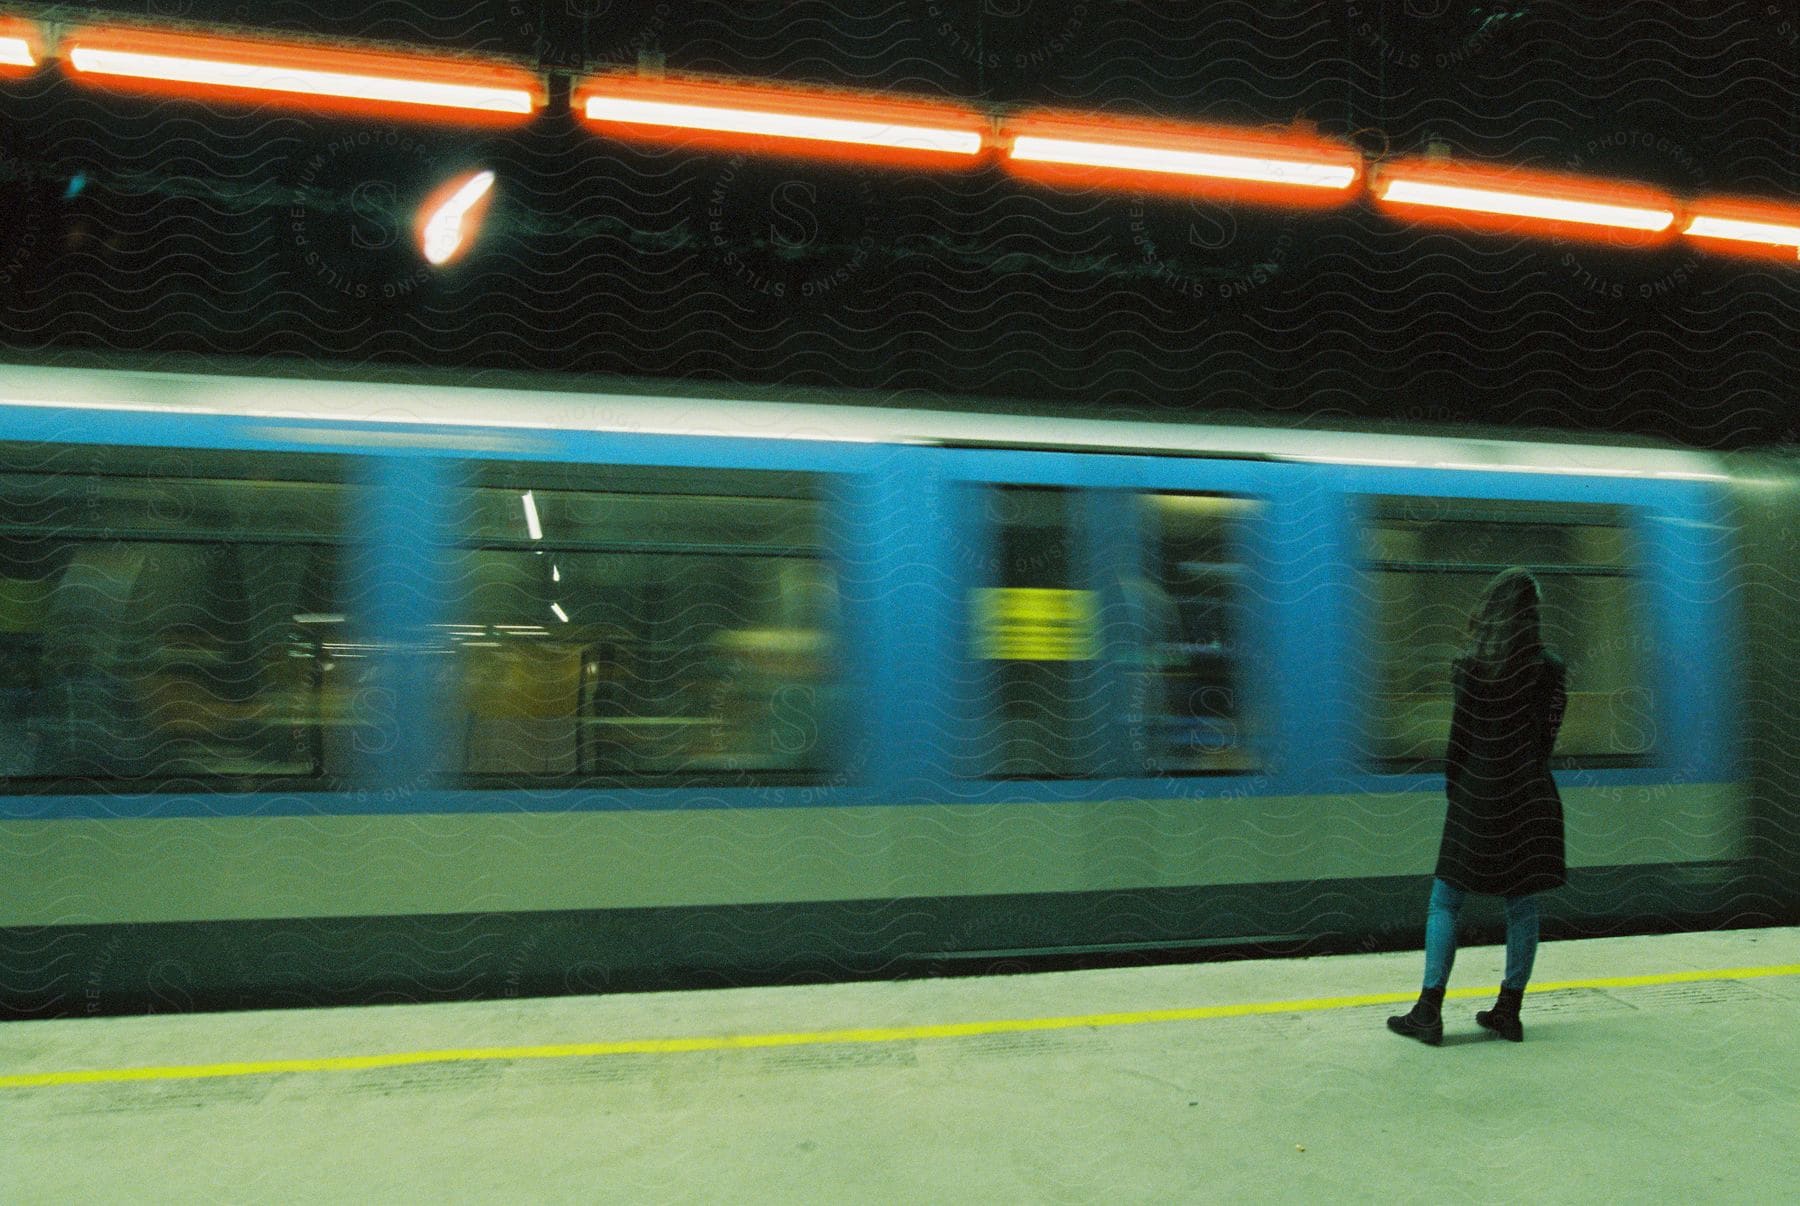 Woman standing on subway platform as train drives by at night creating blurred motion